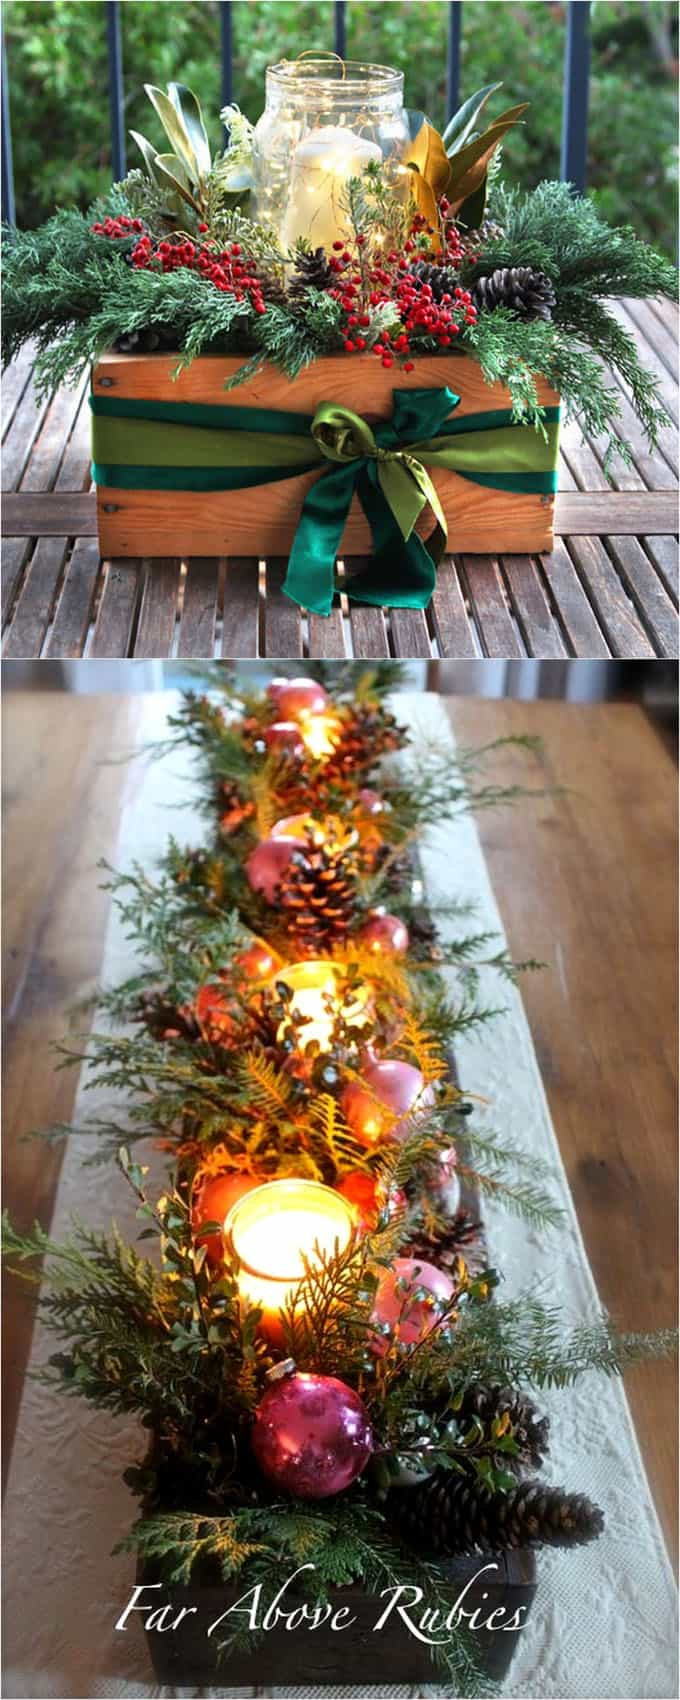 Christmas Table Decorations To Make
 27 Gorgeous DIY Thanksgiving & Christmas Table Decorations